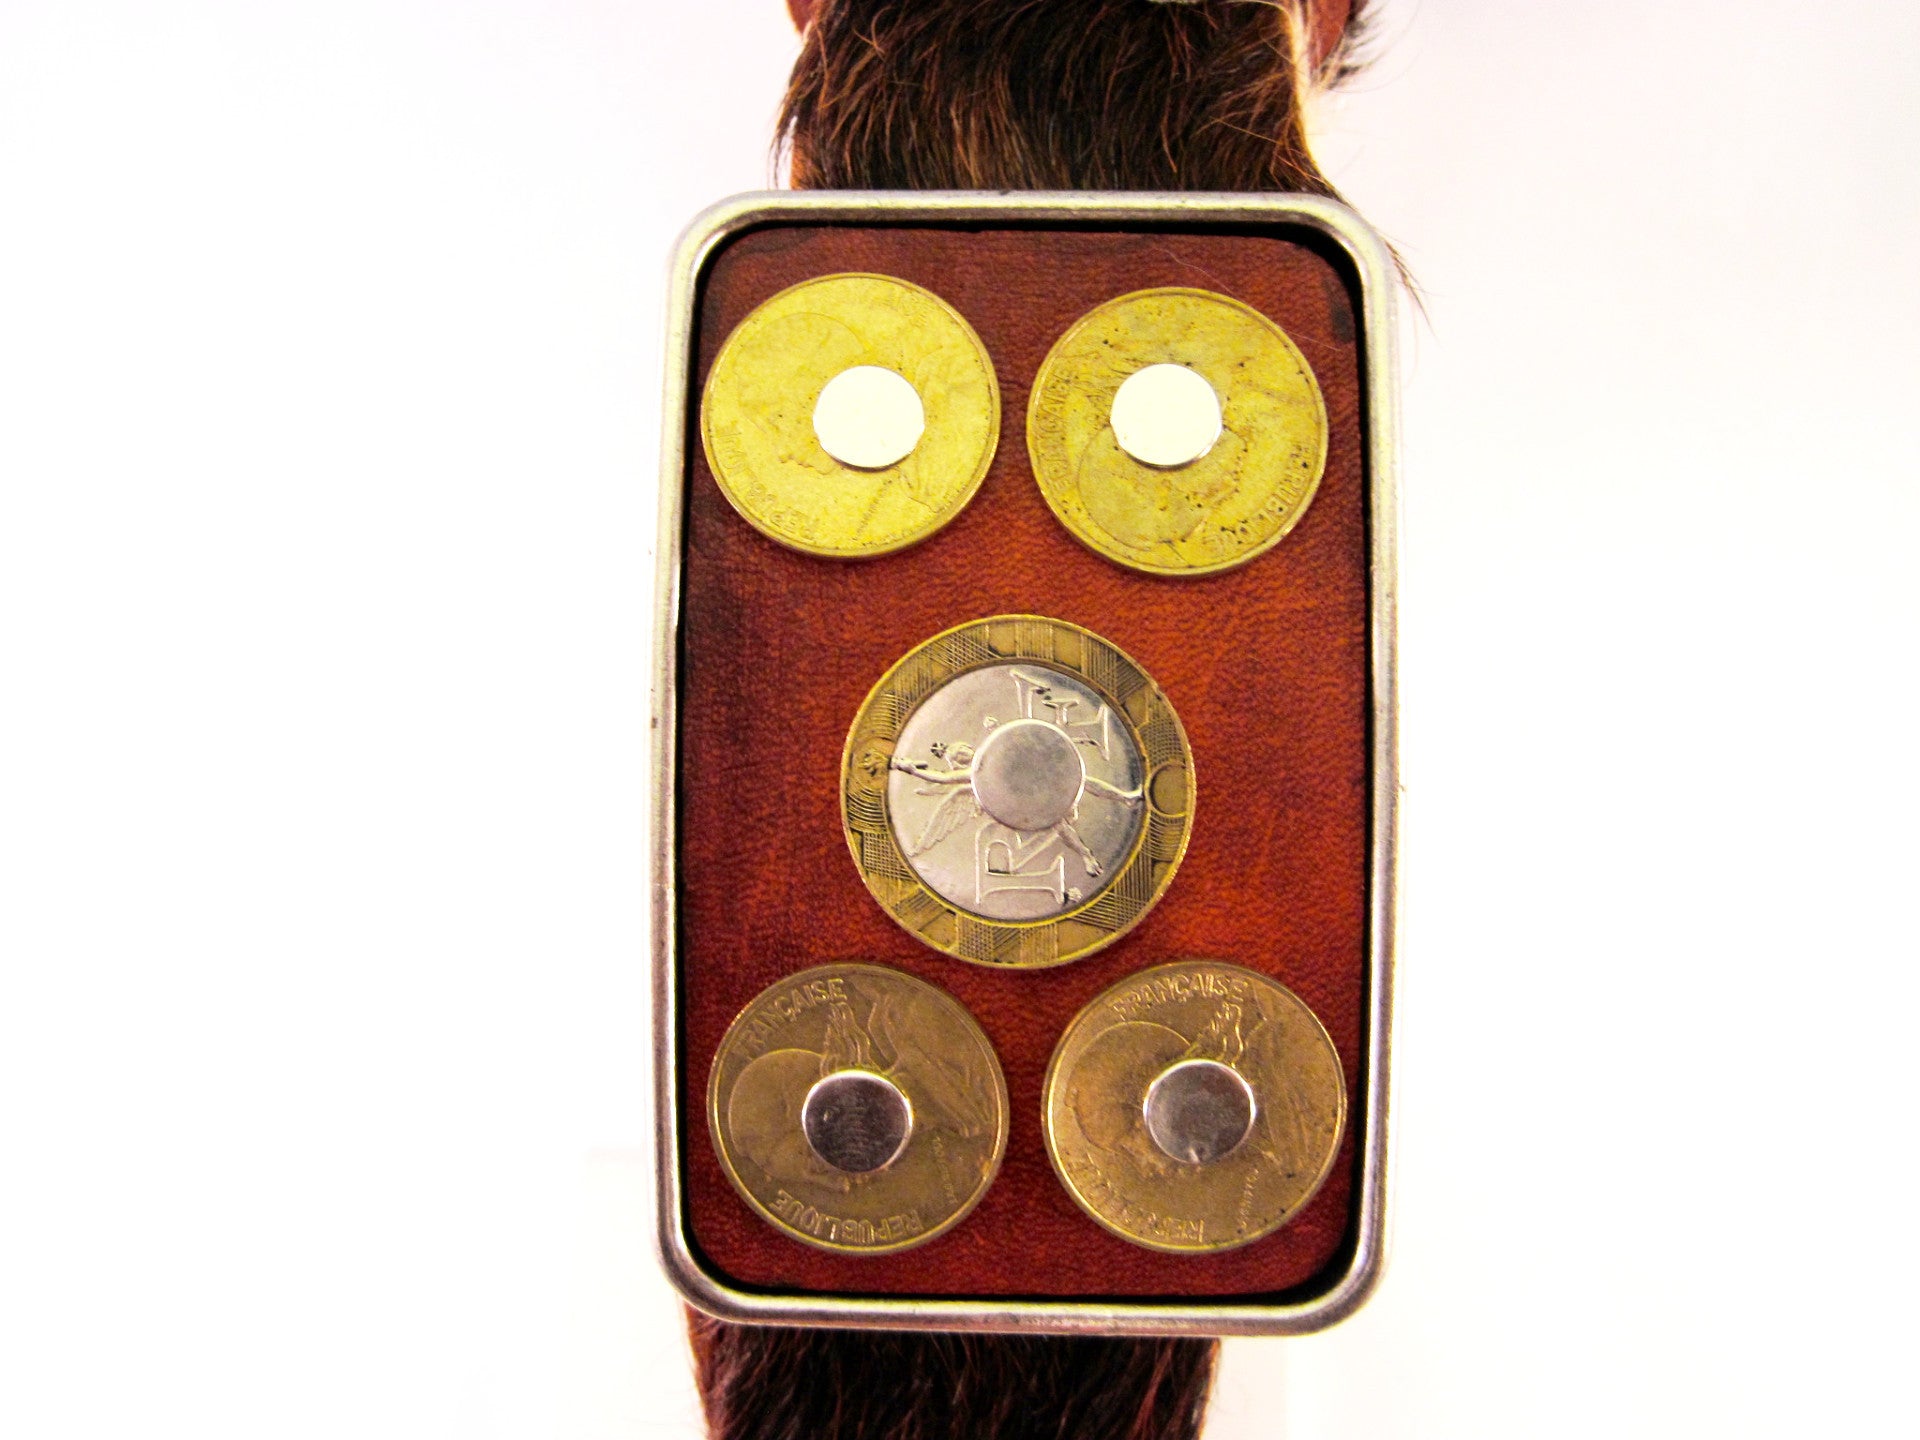 HAIR-ON COWHIDE BELT WITH STUDDED FRENCH FRANC COINS ON THE BUCKLE by NYET Jewelry.